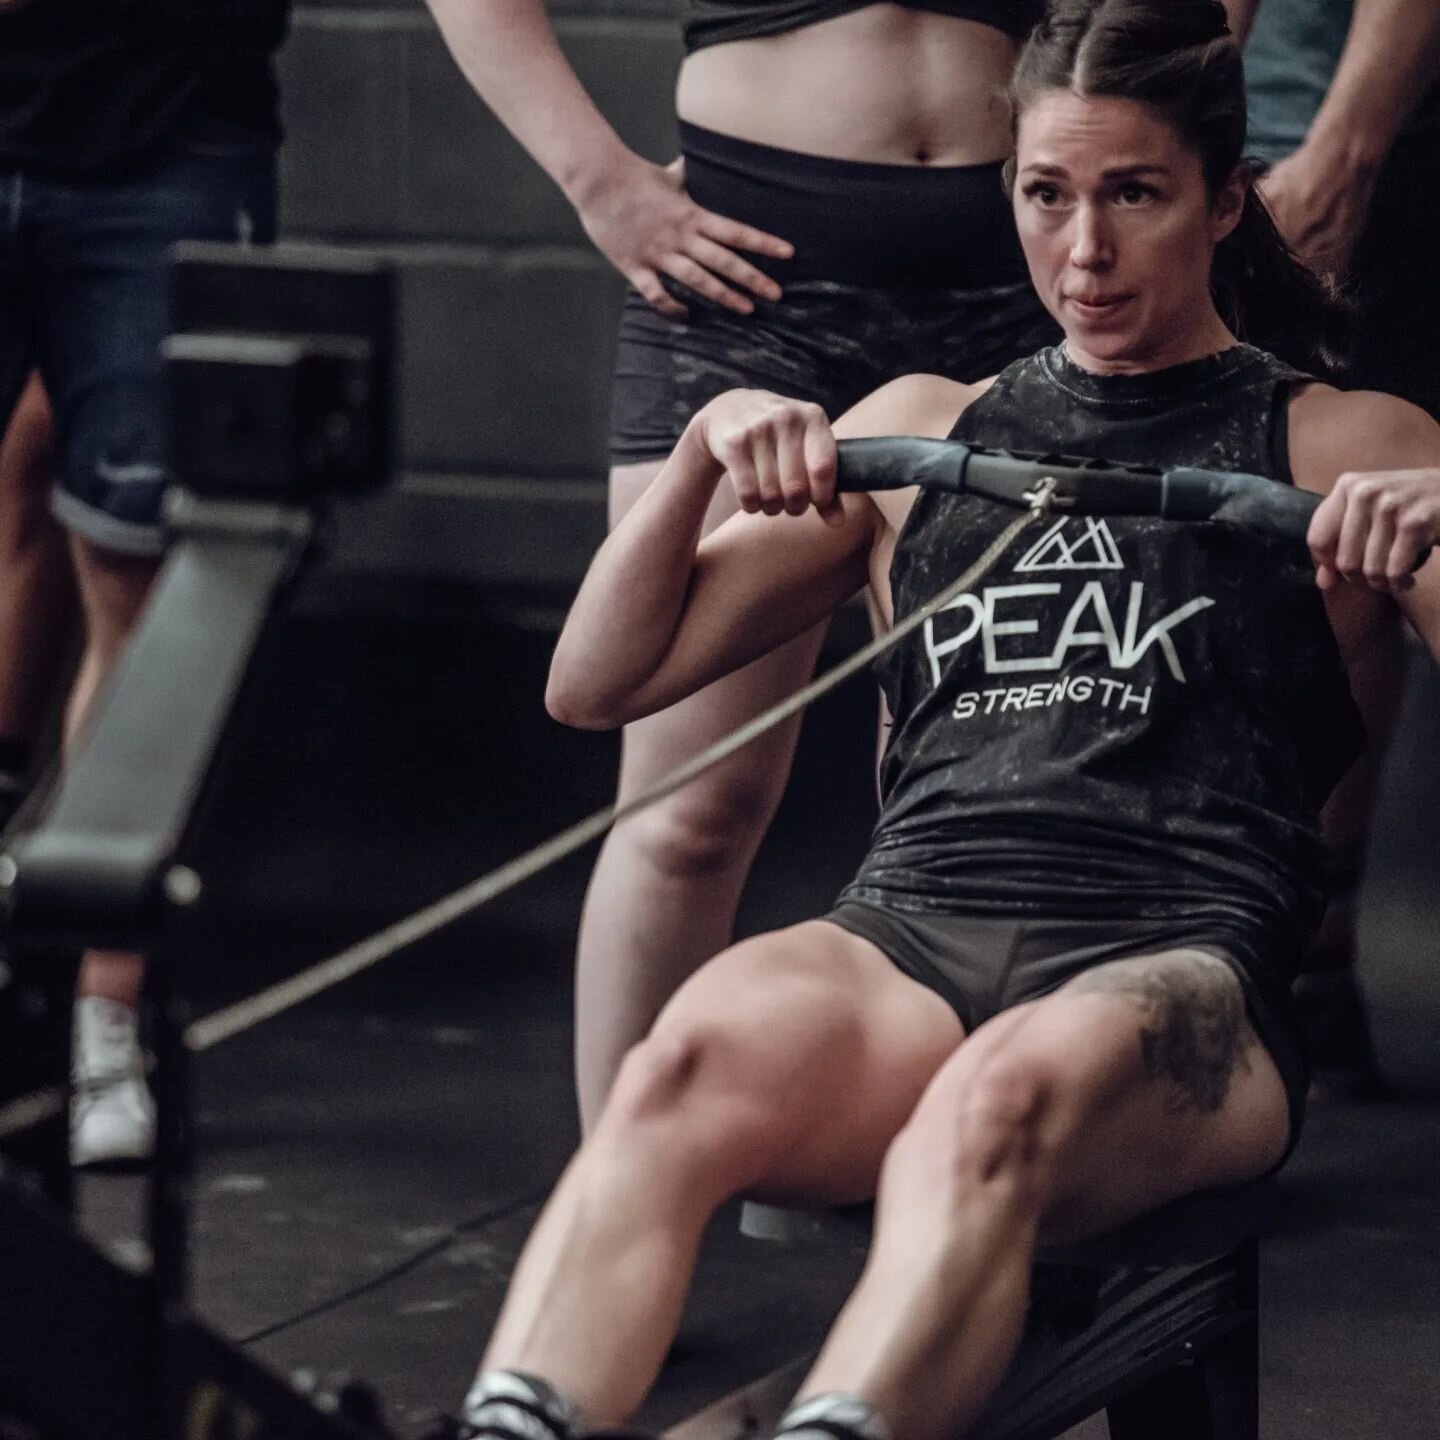 Rowing eliminator at our PEAK OFF TRIBES competition.

What an amazing event with some even better pain faces! 

Think these can be topped at our winter comp this November?

Why not enter and see!

📸 @sarakinas

#peakoff #wintercomp #painface #compe